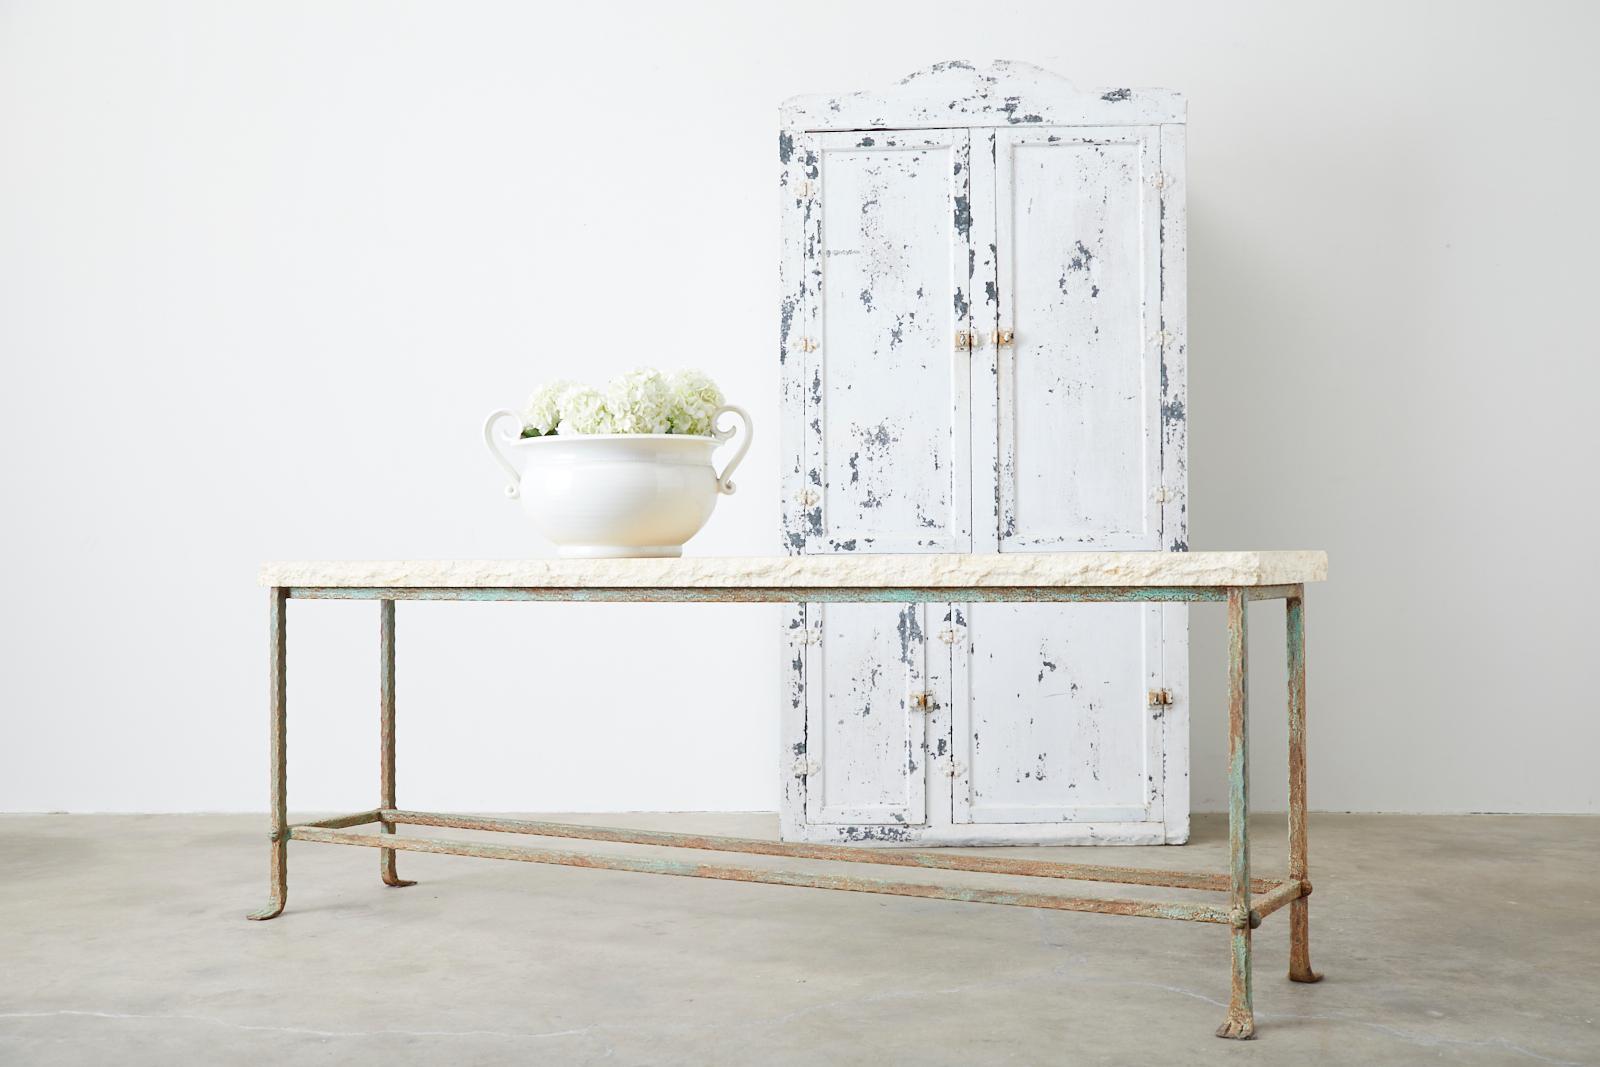 Amazing monumental garden table or console table constructed from molded stone and iron. The stone top is 2 inches thick and features a hand-chiseled live edge with a rough travertine style finish. The large iron base has a unique hand-hammered